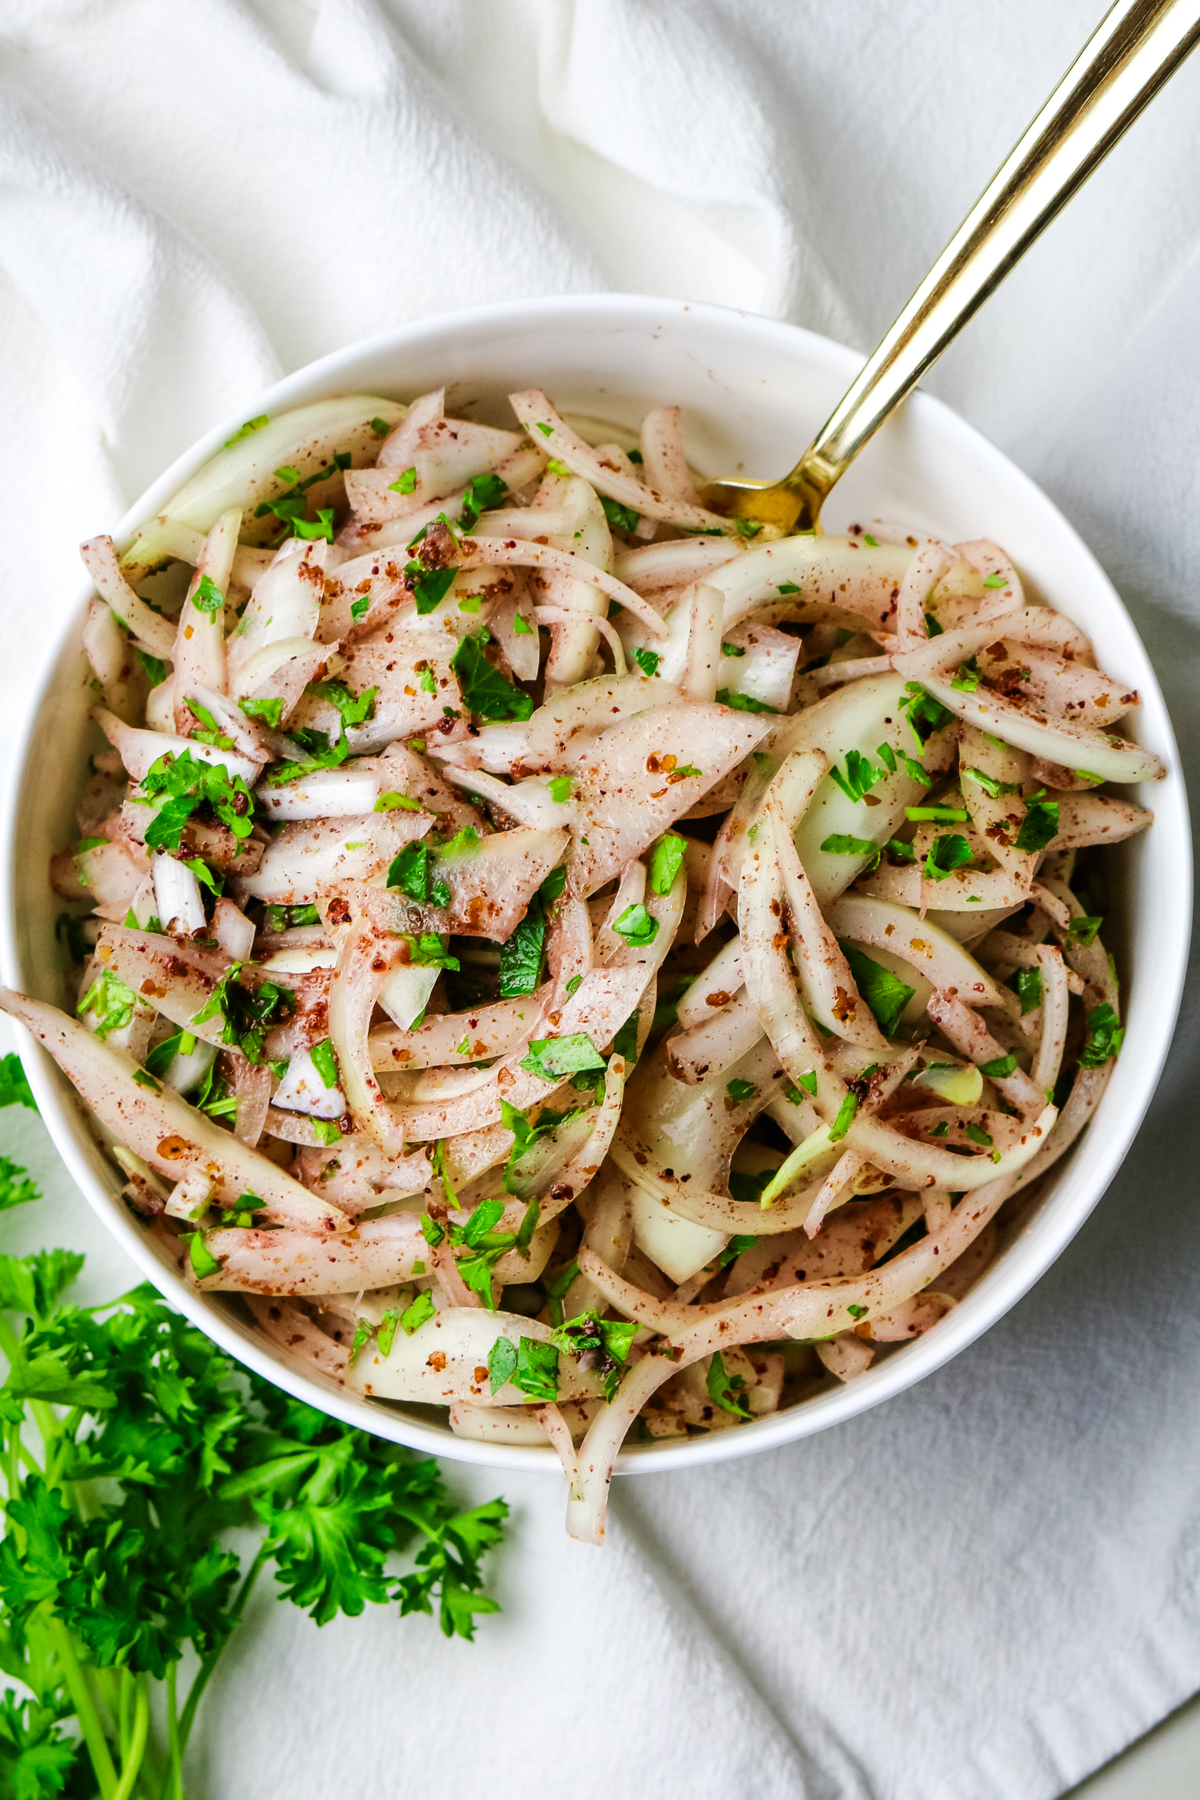 tossed sliced onions with green parsley and sumac seasoning.